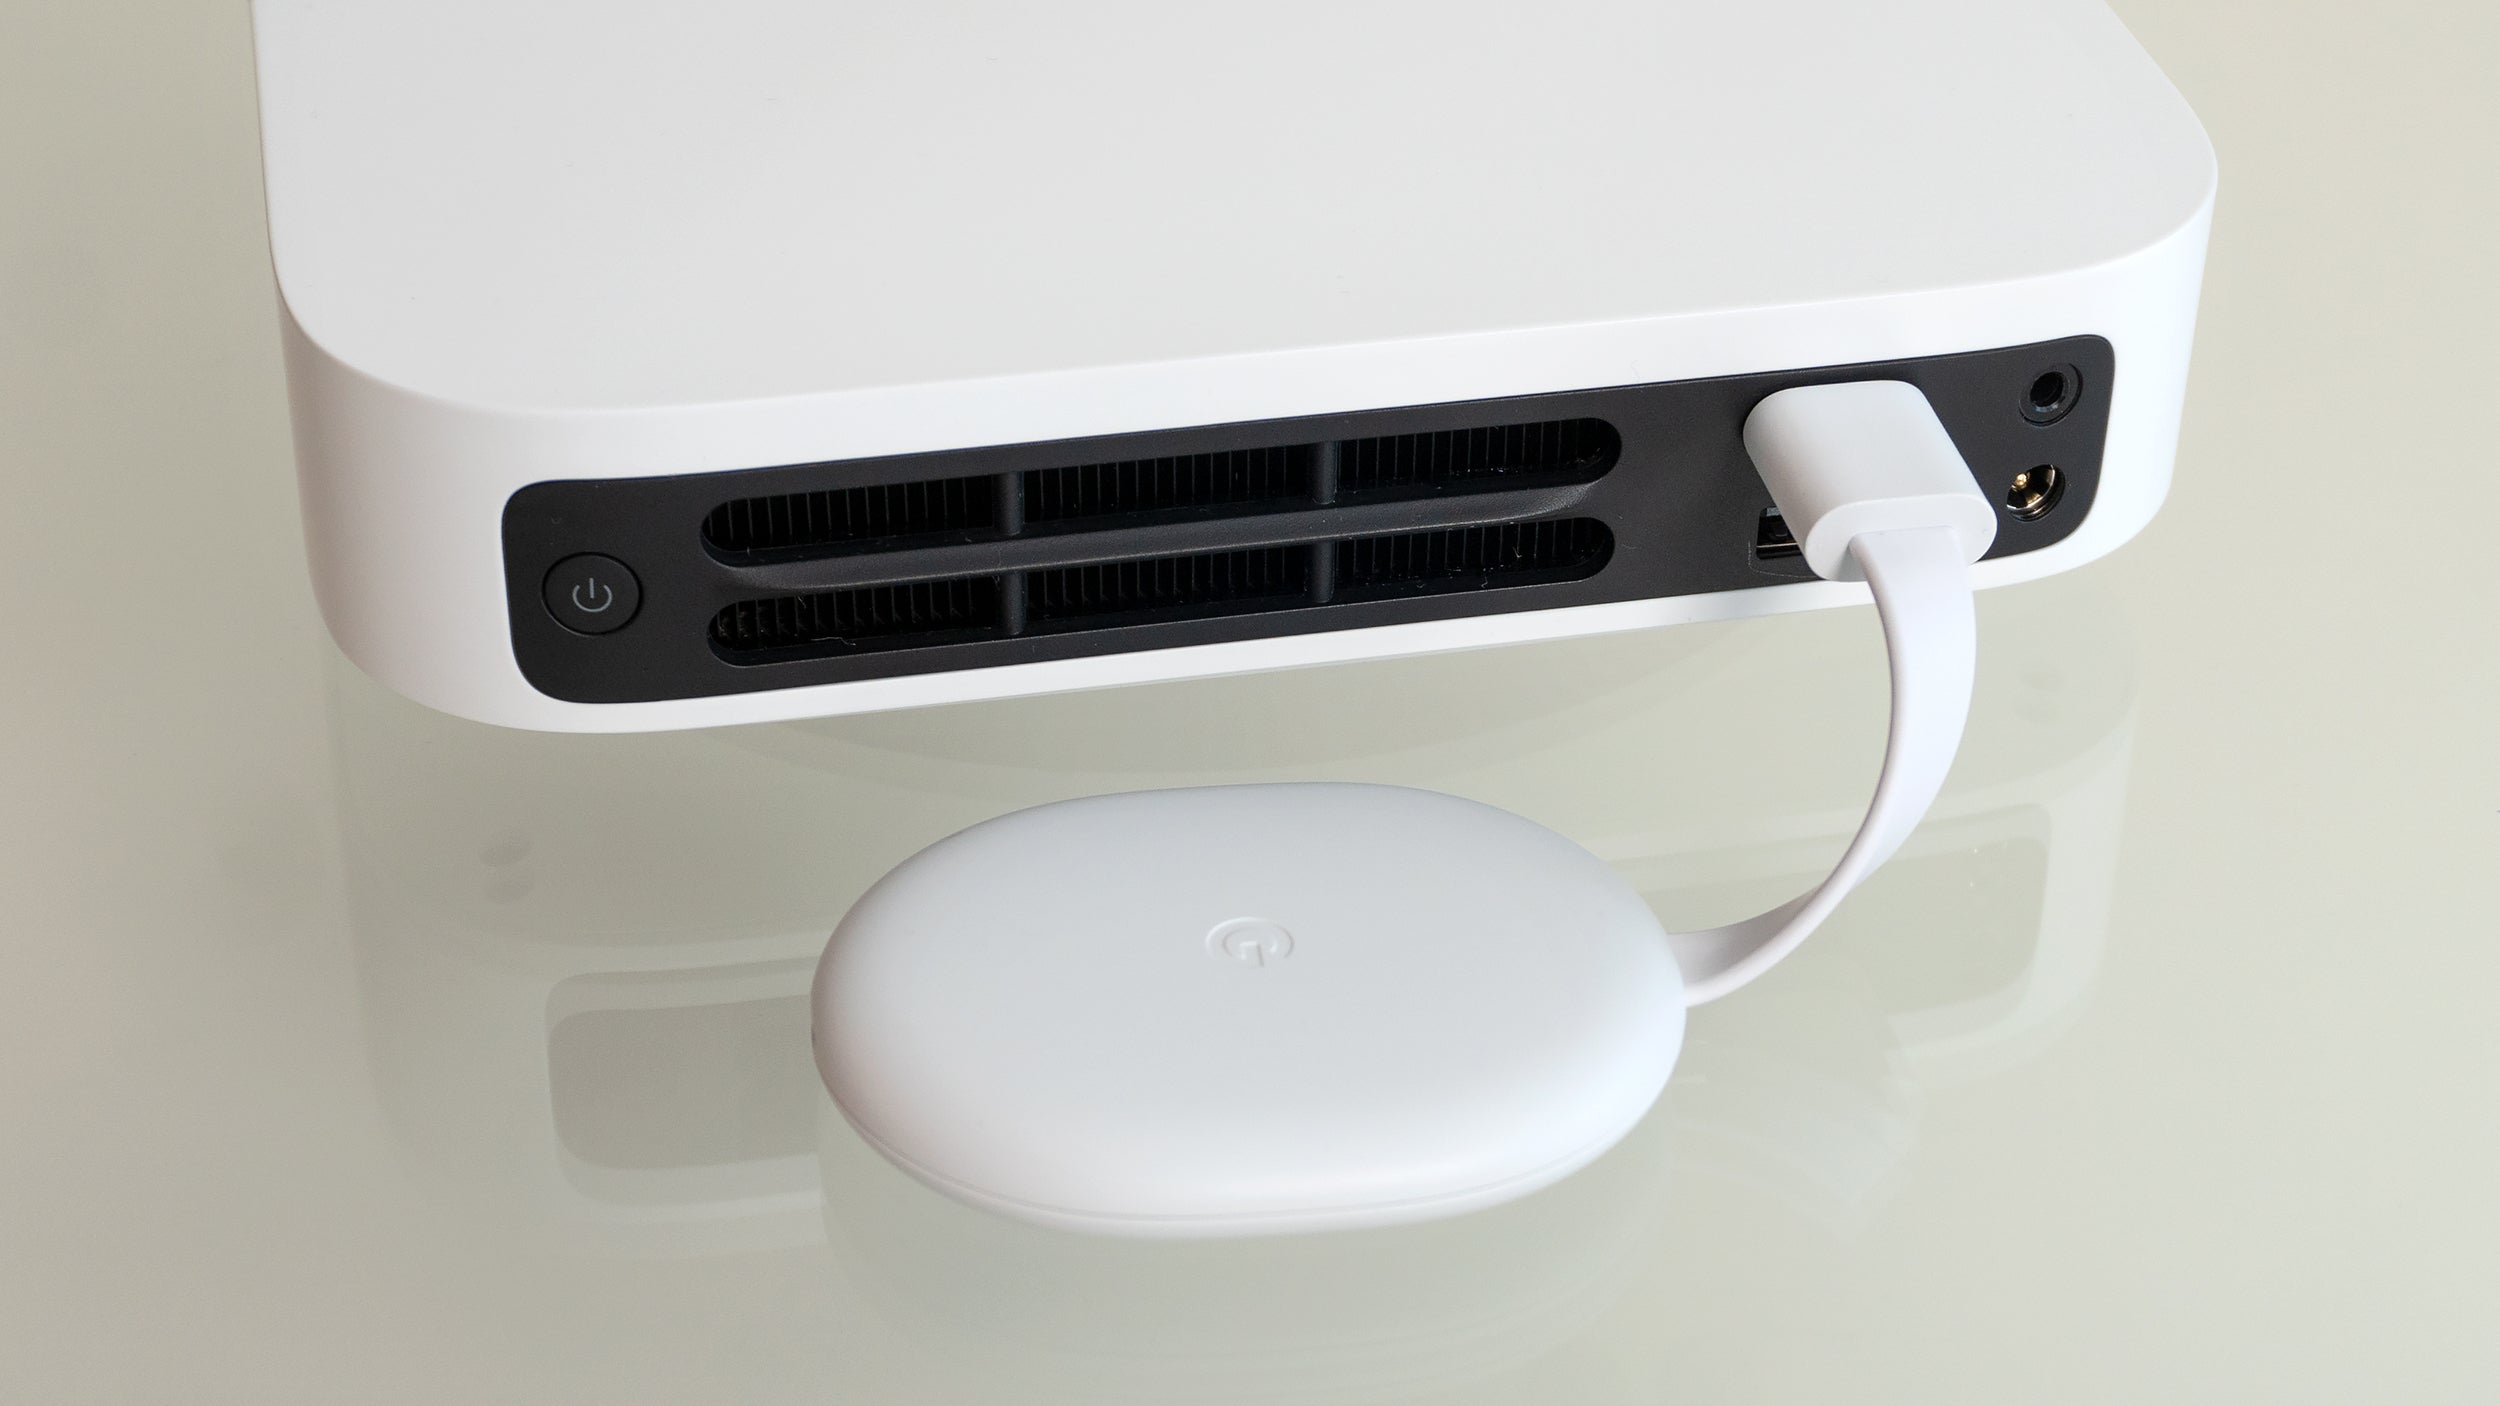 The Elfin projector isn't an approved Netflix device, so even through Google TV is the OS, you'll probably still want to use a cheap streaming dongle as the easiest way to access the streaming service. (Photo: Andrew Liszewski - Gizmodo)